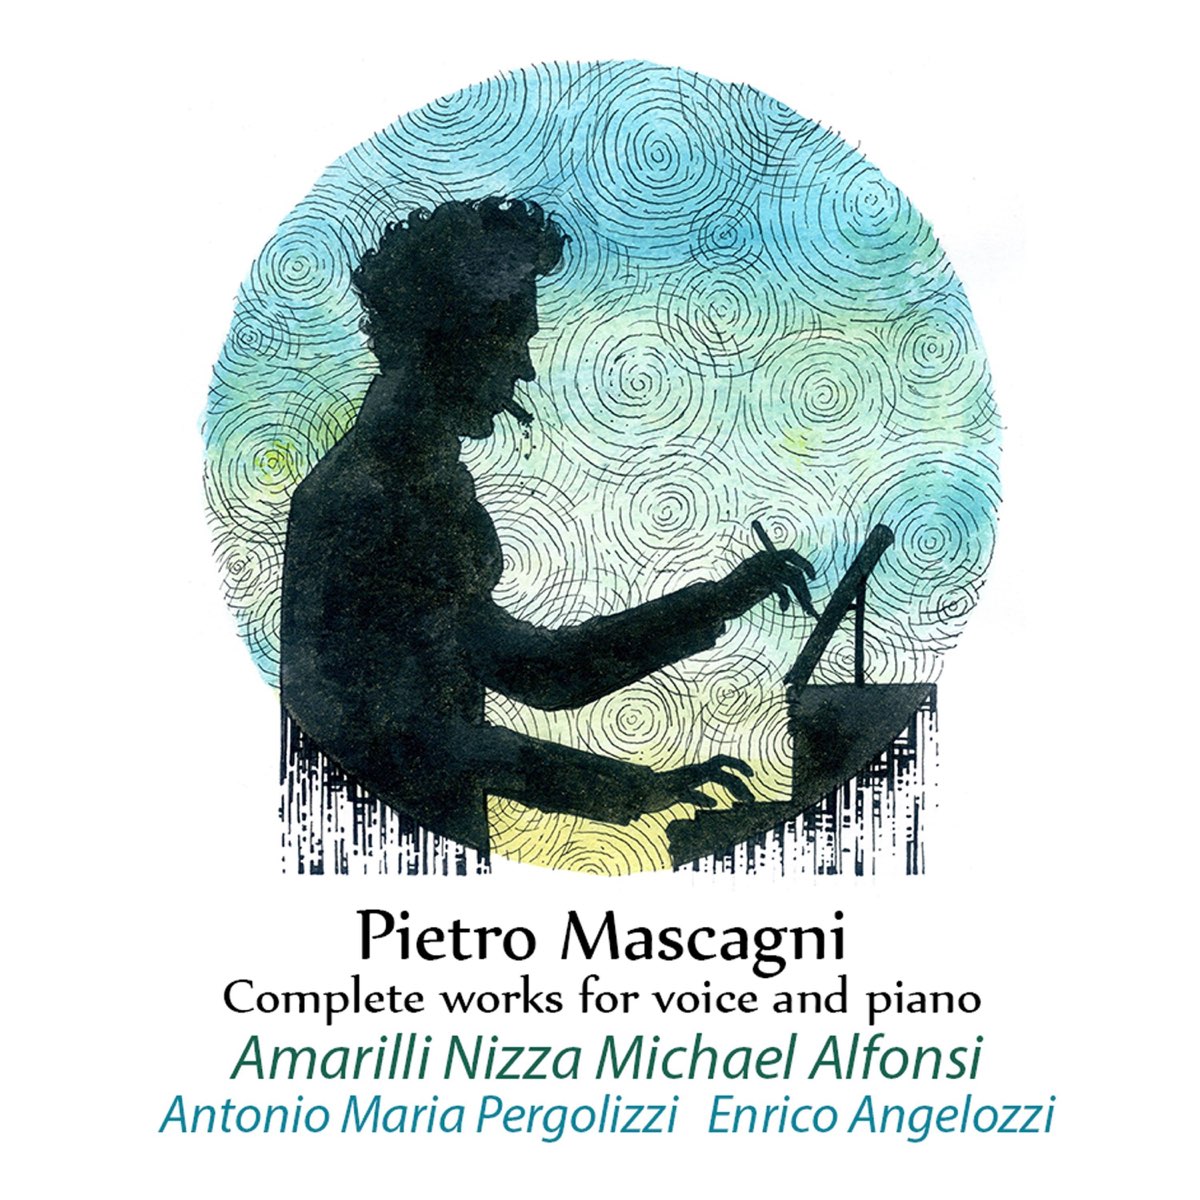 Pietro Mascagni: Complete works for voice and piano by Various Artists on  Apple Music